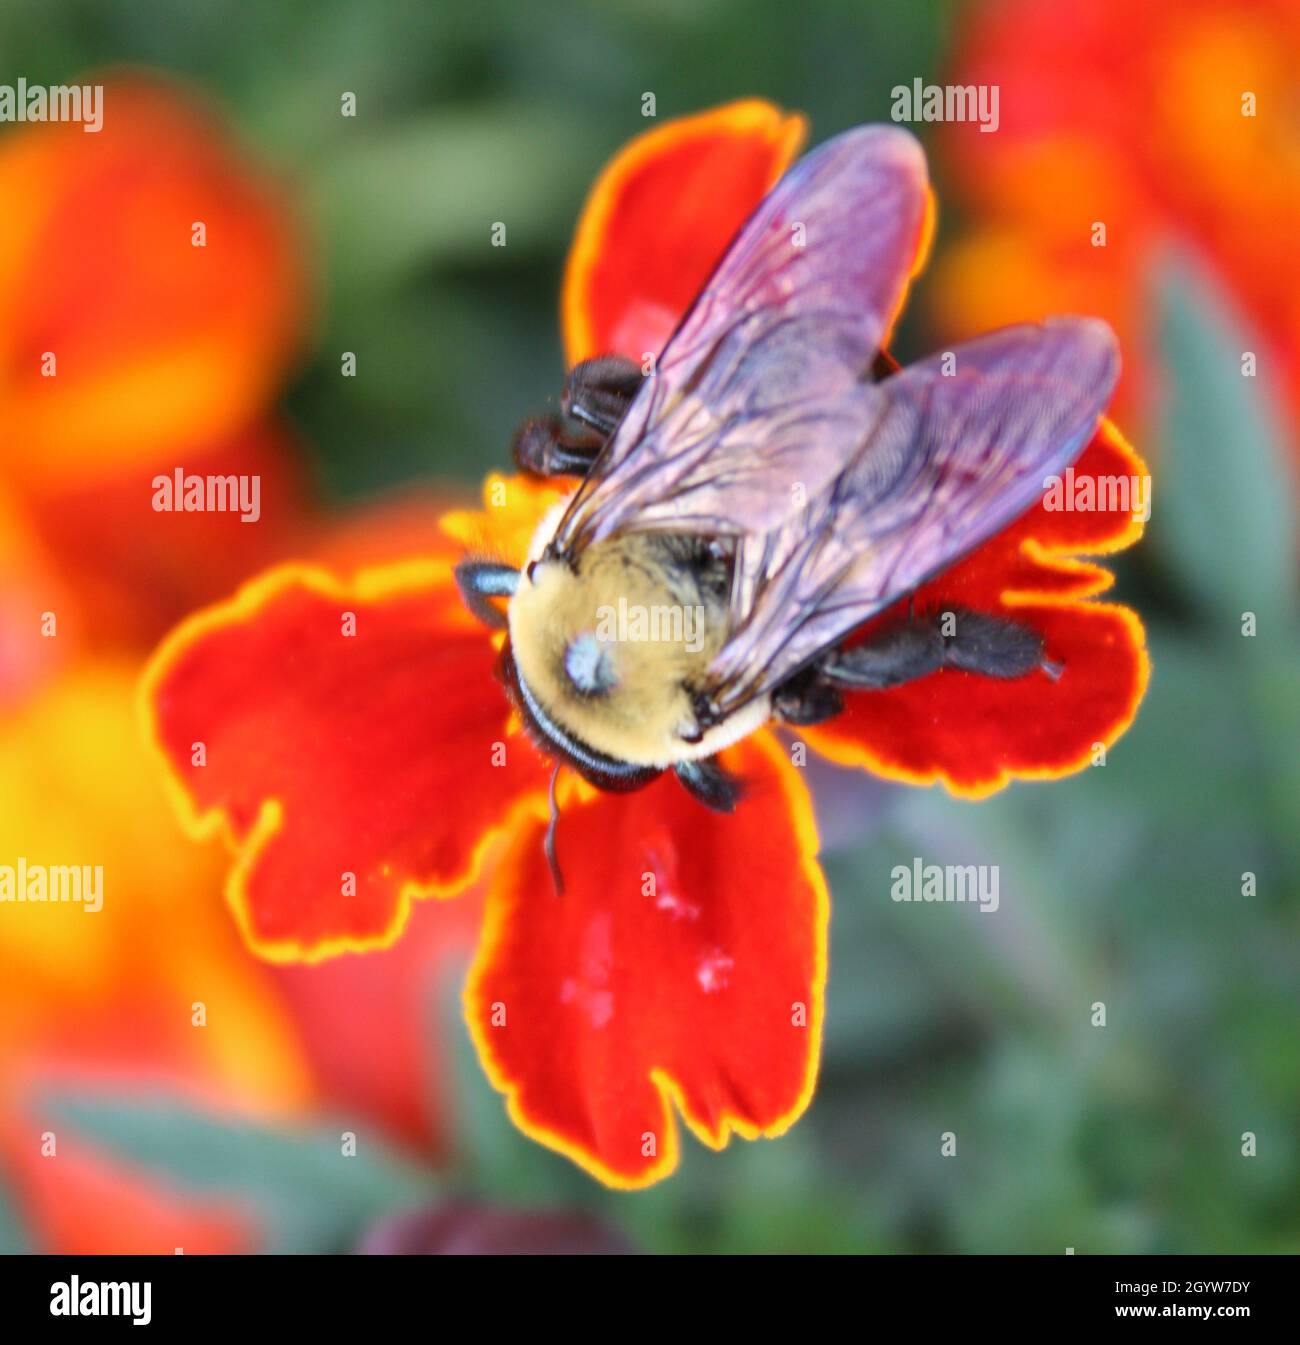 Large bee pollinating a Marigold flower. Stock Photo